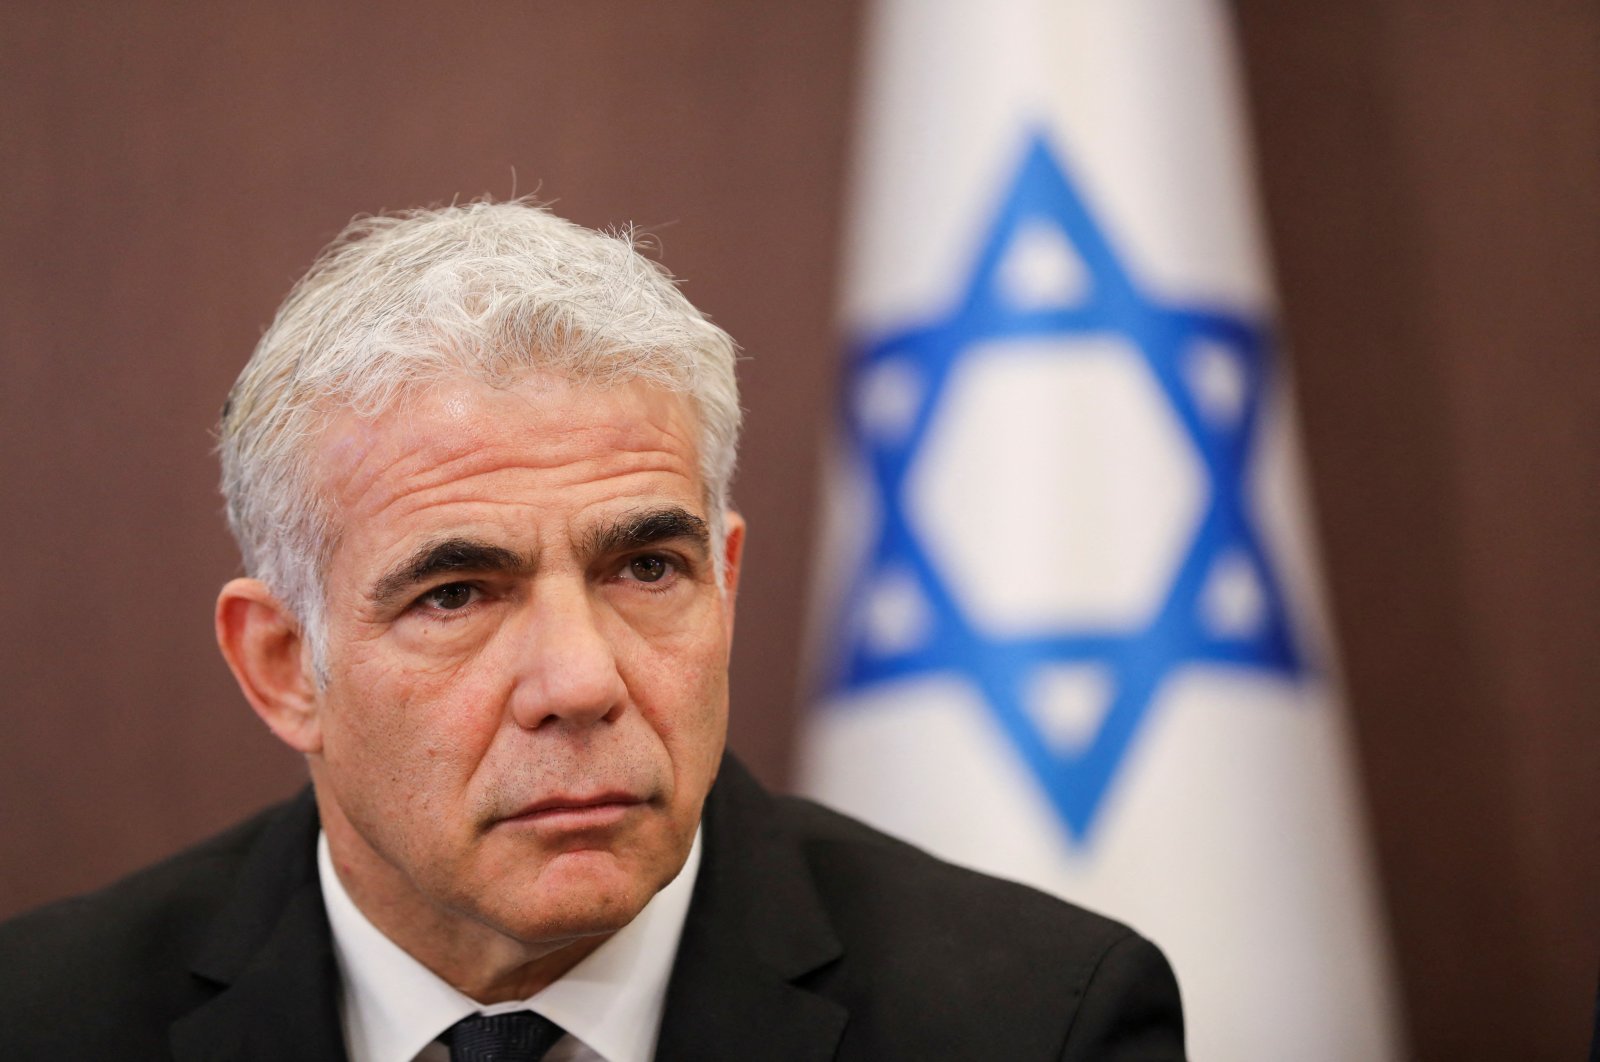 FILE PHOTO: Israeli Foreign Minister Yair Lapid attends a cabinet meeting at the Prime Minister's office in Jerusalem May 15, 2022. Abir Sultan/Pool via REUTERS/File Photo